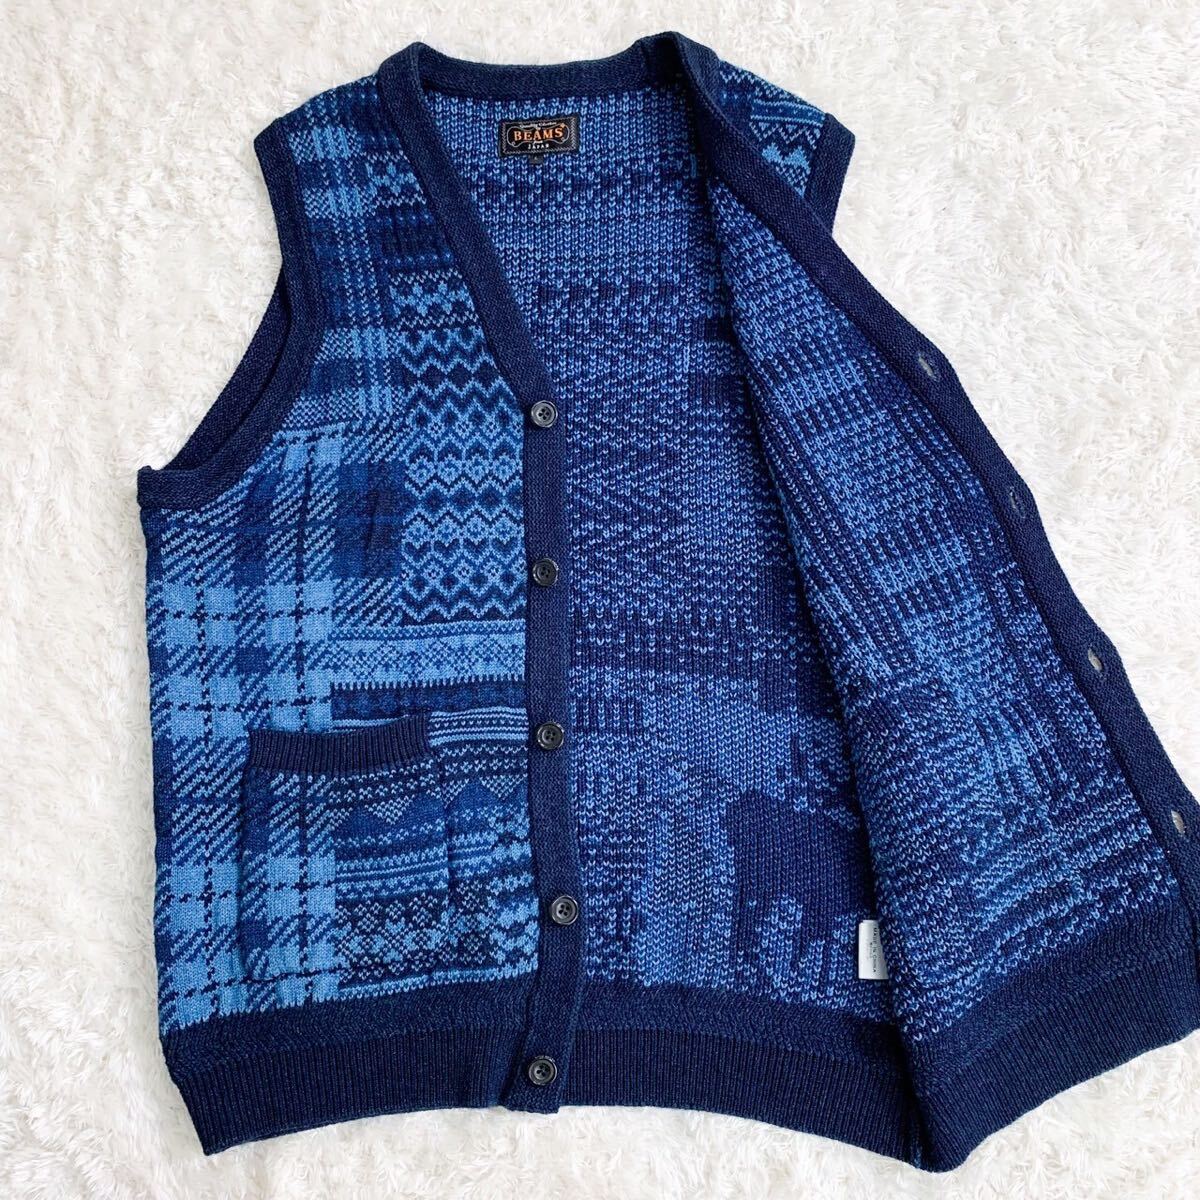  ultimate beautiful goods! BEAMS PLUS Beams plus animal Jaguar do woven knitted the best blue patchwork sweater L size 